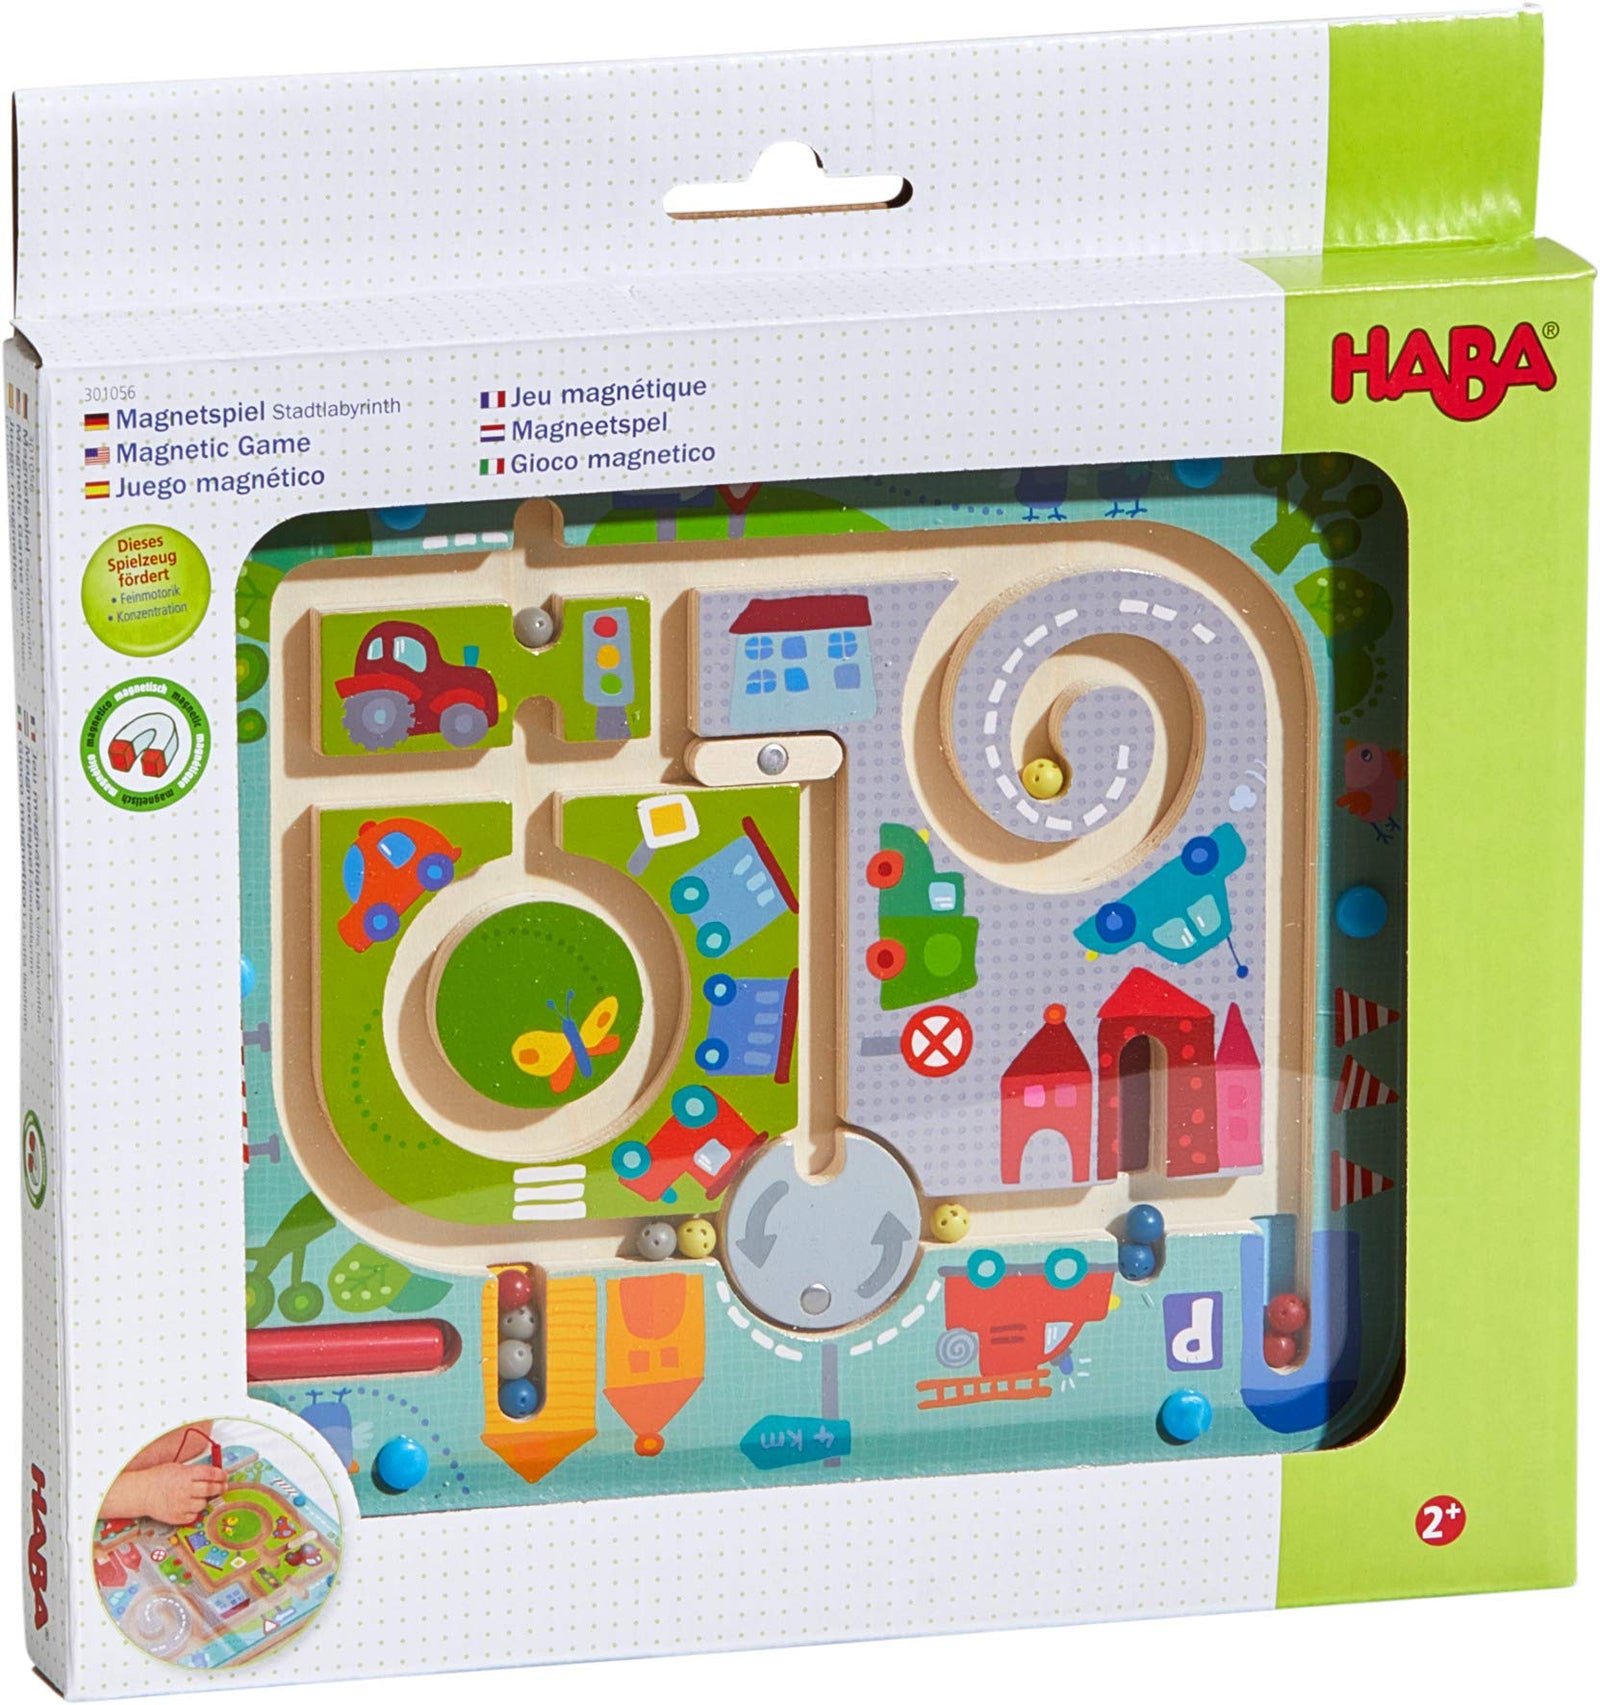 HABA Town Maze Magnetic Puzzle Game - Learning & Education Toys for Preschoolers